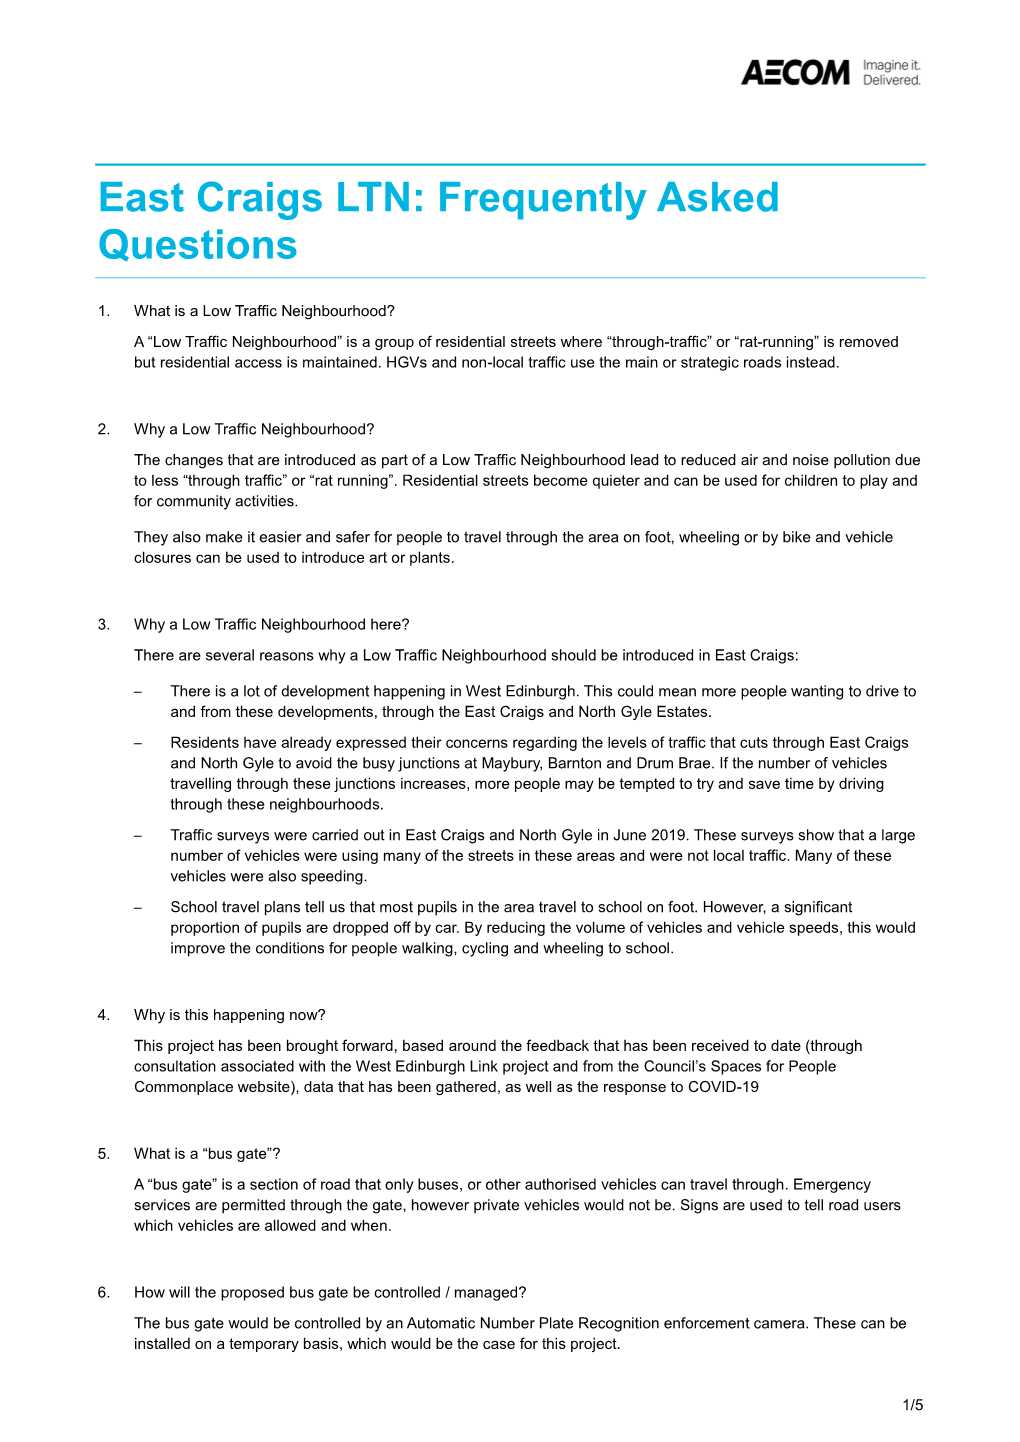 East Craigs LTN: Frequently Asked Questions